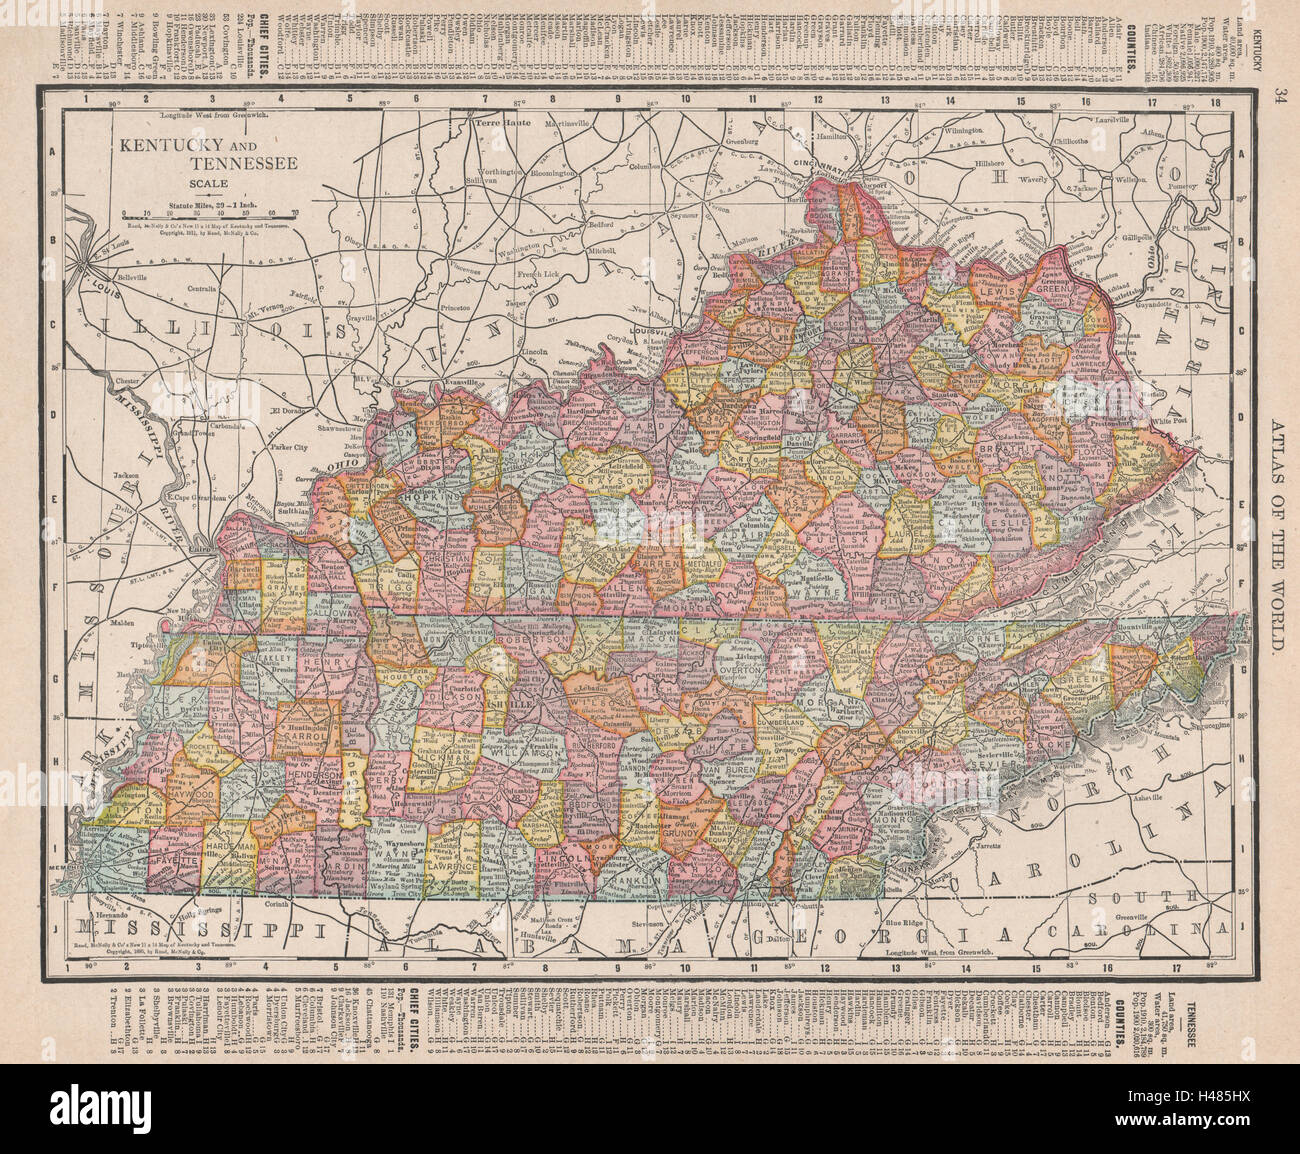 Kentucky and Tennessee state map showing counties. RAND MCNALLY 1912 old Stock Photo